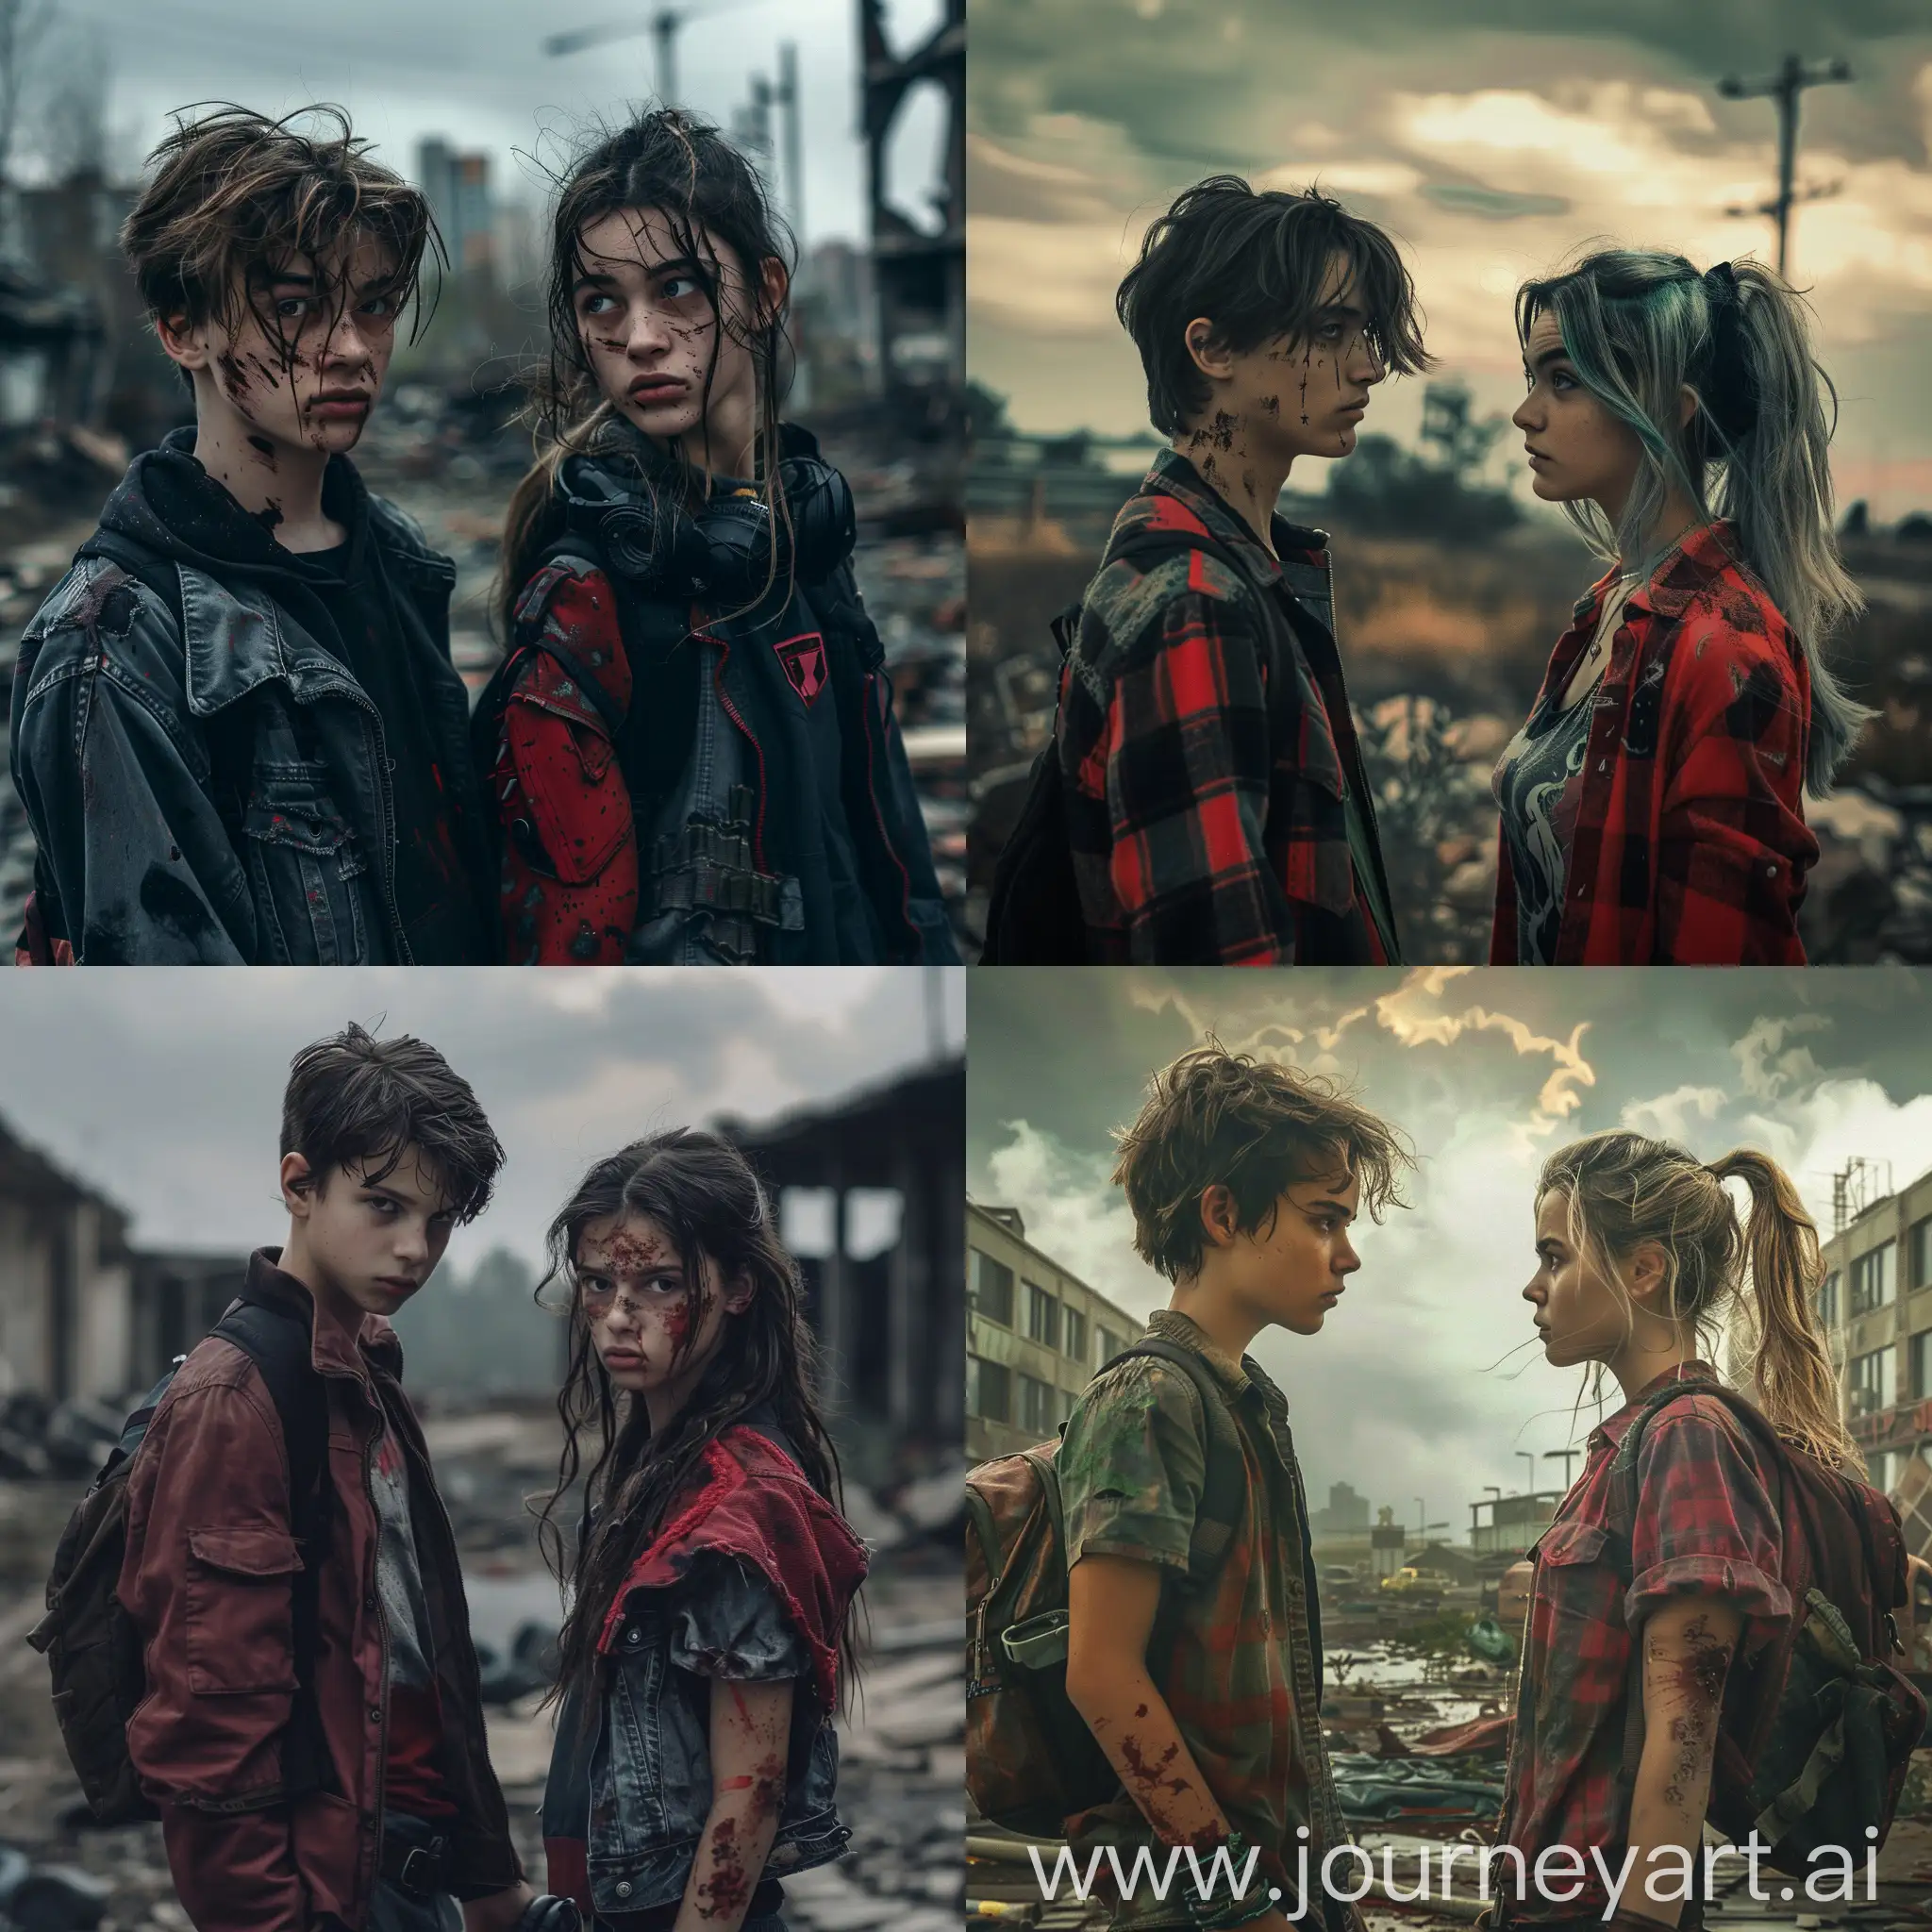 Apocalyptic-Gender-War-Intense-Standoff-Between-Young-Man-and-Woman